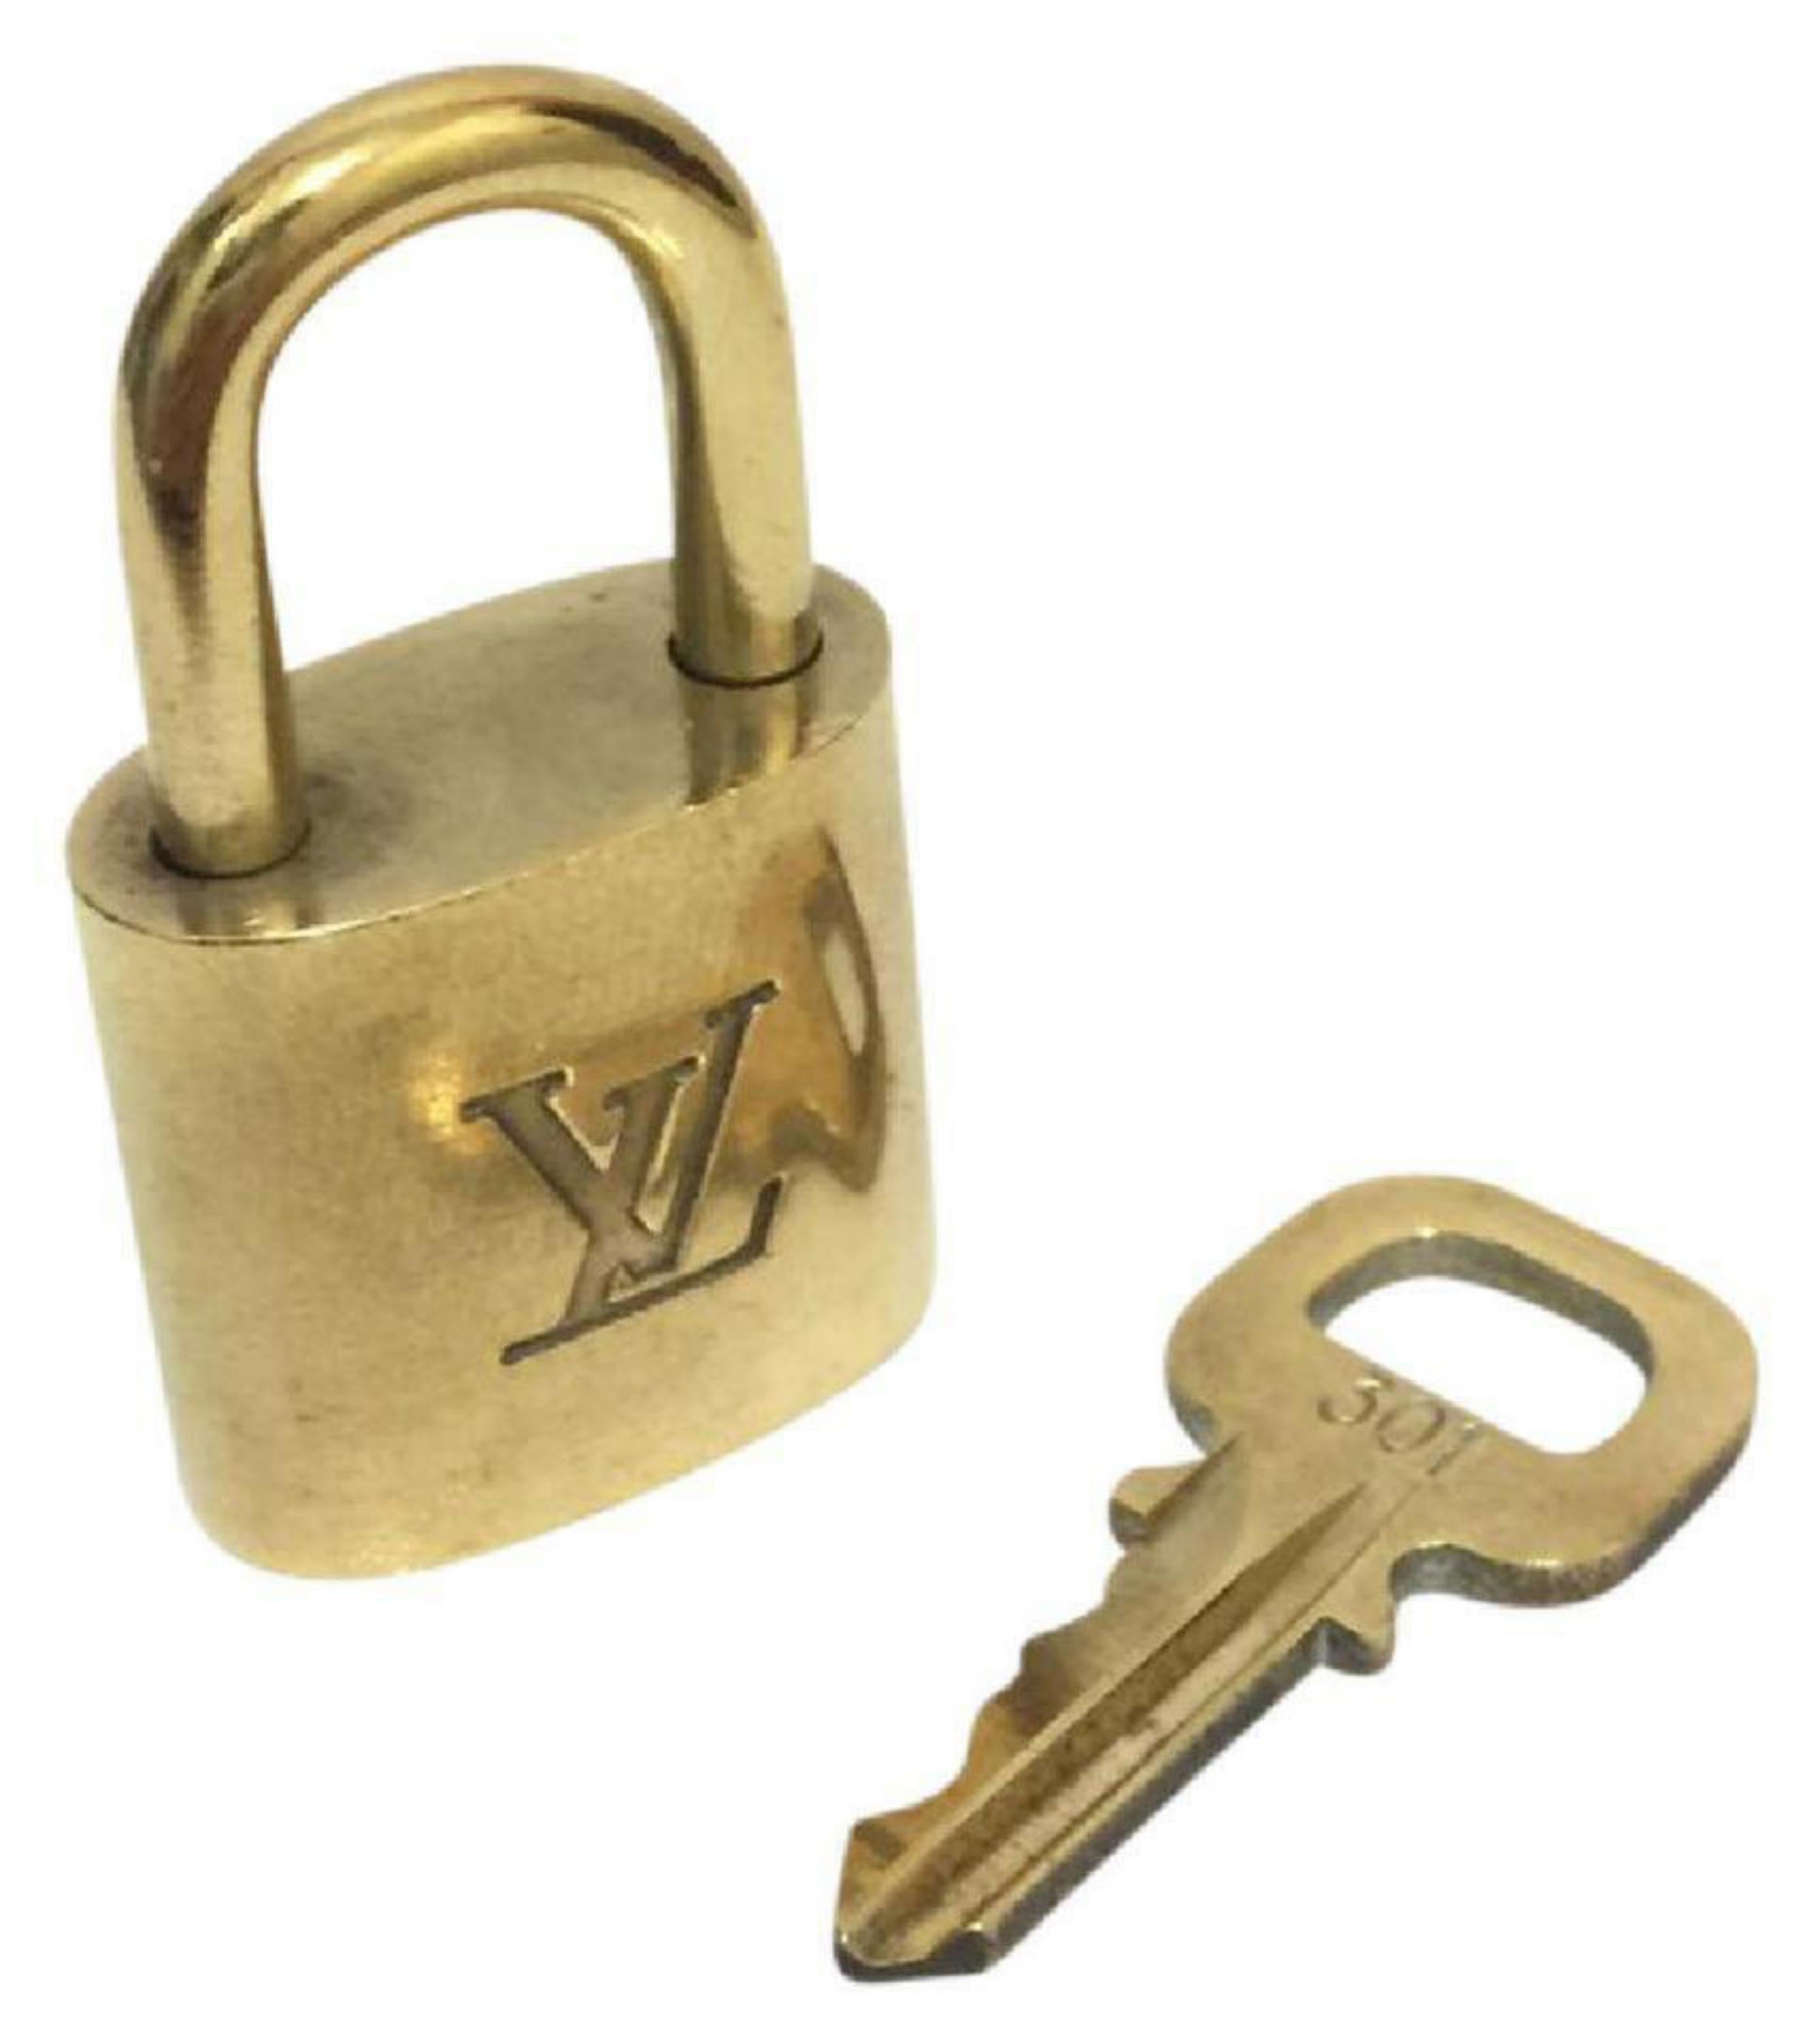 Louis Vuitton Gold Single Key Lock Pad Lock and Key 867695 In Fair Condition For Sale In Forest Hills, NY